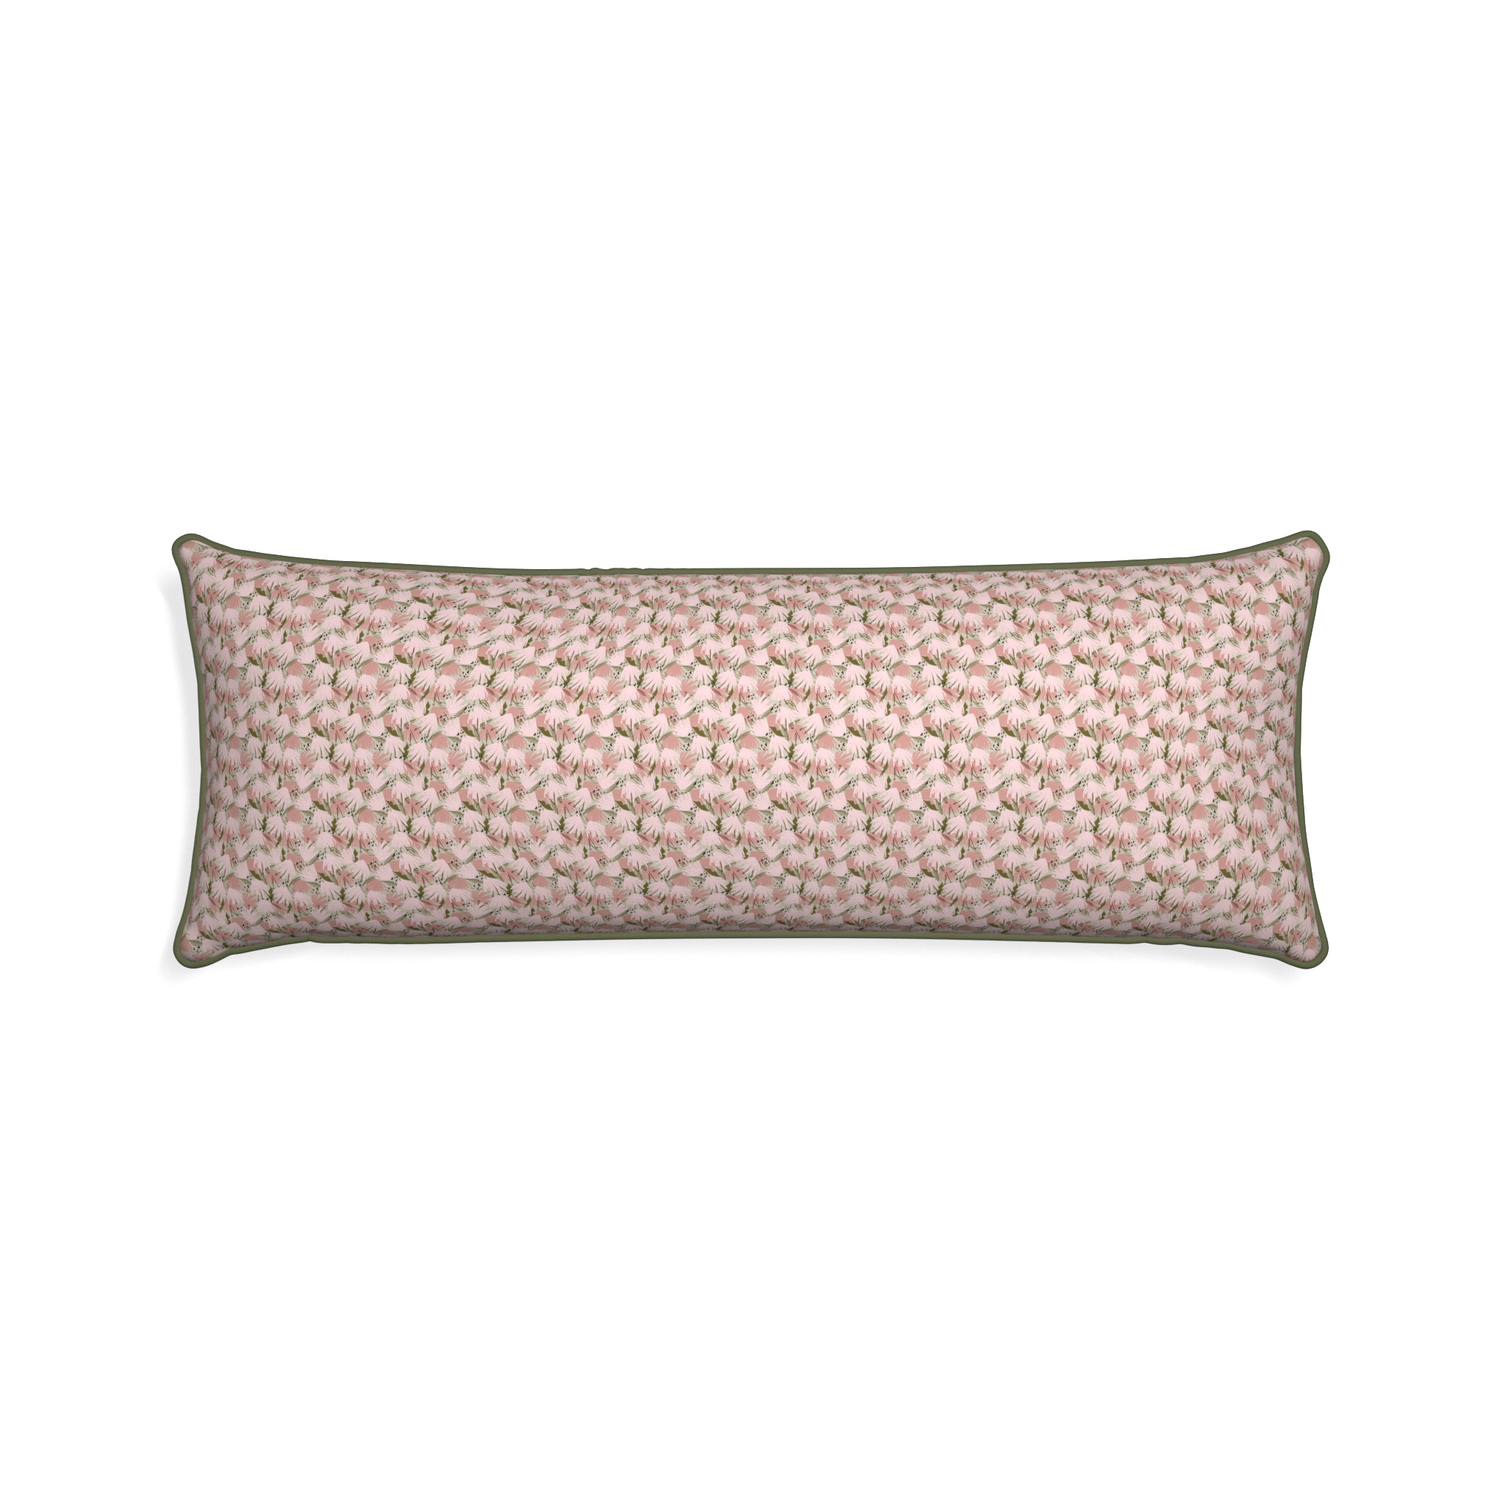 Xl-lumbar eden pink custom pink floralpillow with f piping on white background